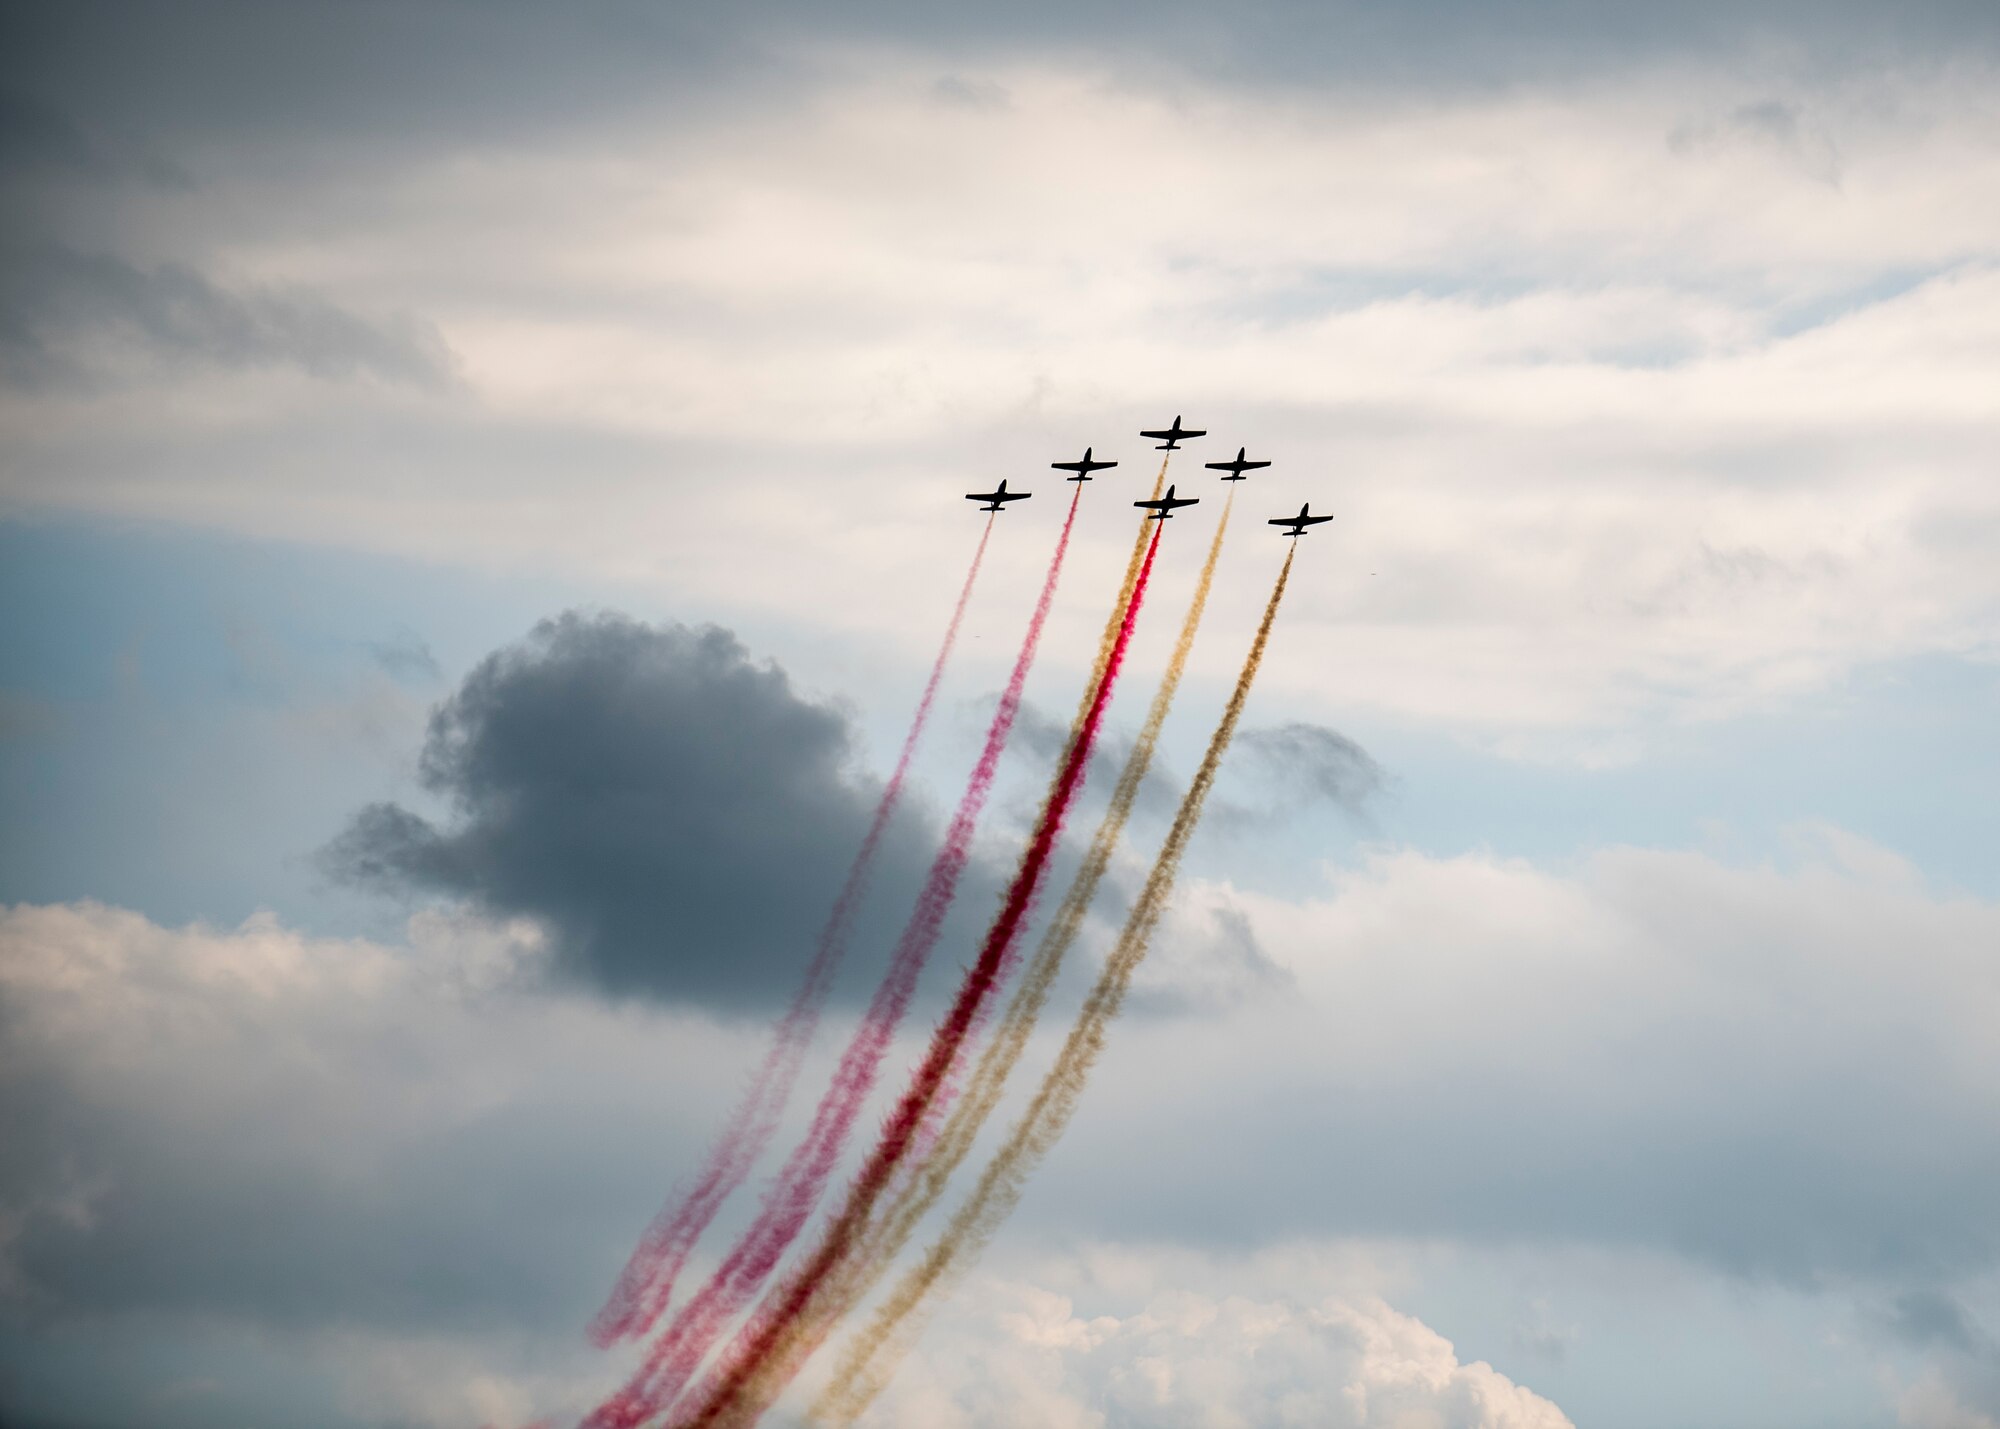 The Polish Air Force’s aerobatic demonstration team, “White-Red Sparks”, flies above Ostrava Air Base, Czech Republic, during NATO Days. NATO Days is a Czech Republic-led air show and exhibition that showcases military ground and aviation capabilities from 19 nations. Participation in NATO Days increases our understanding of European ally and partner capabilities, greatly enhancing our ability to operate together as a team. (U.S. Navy photo by Mass Communication Specialist 2nd Class Robert J. Baldock)